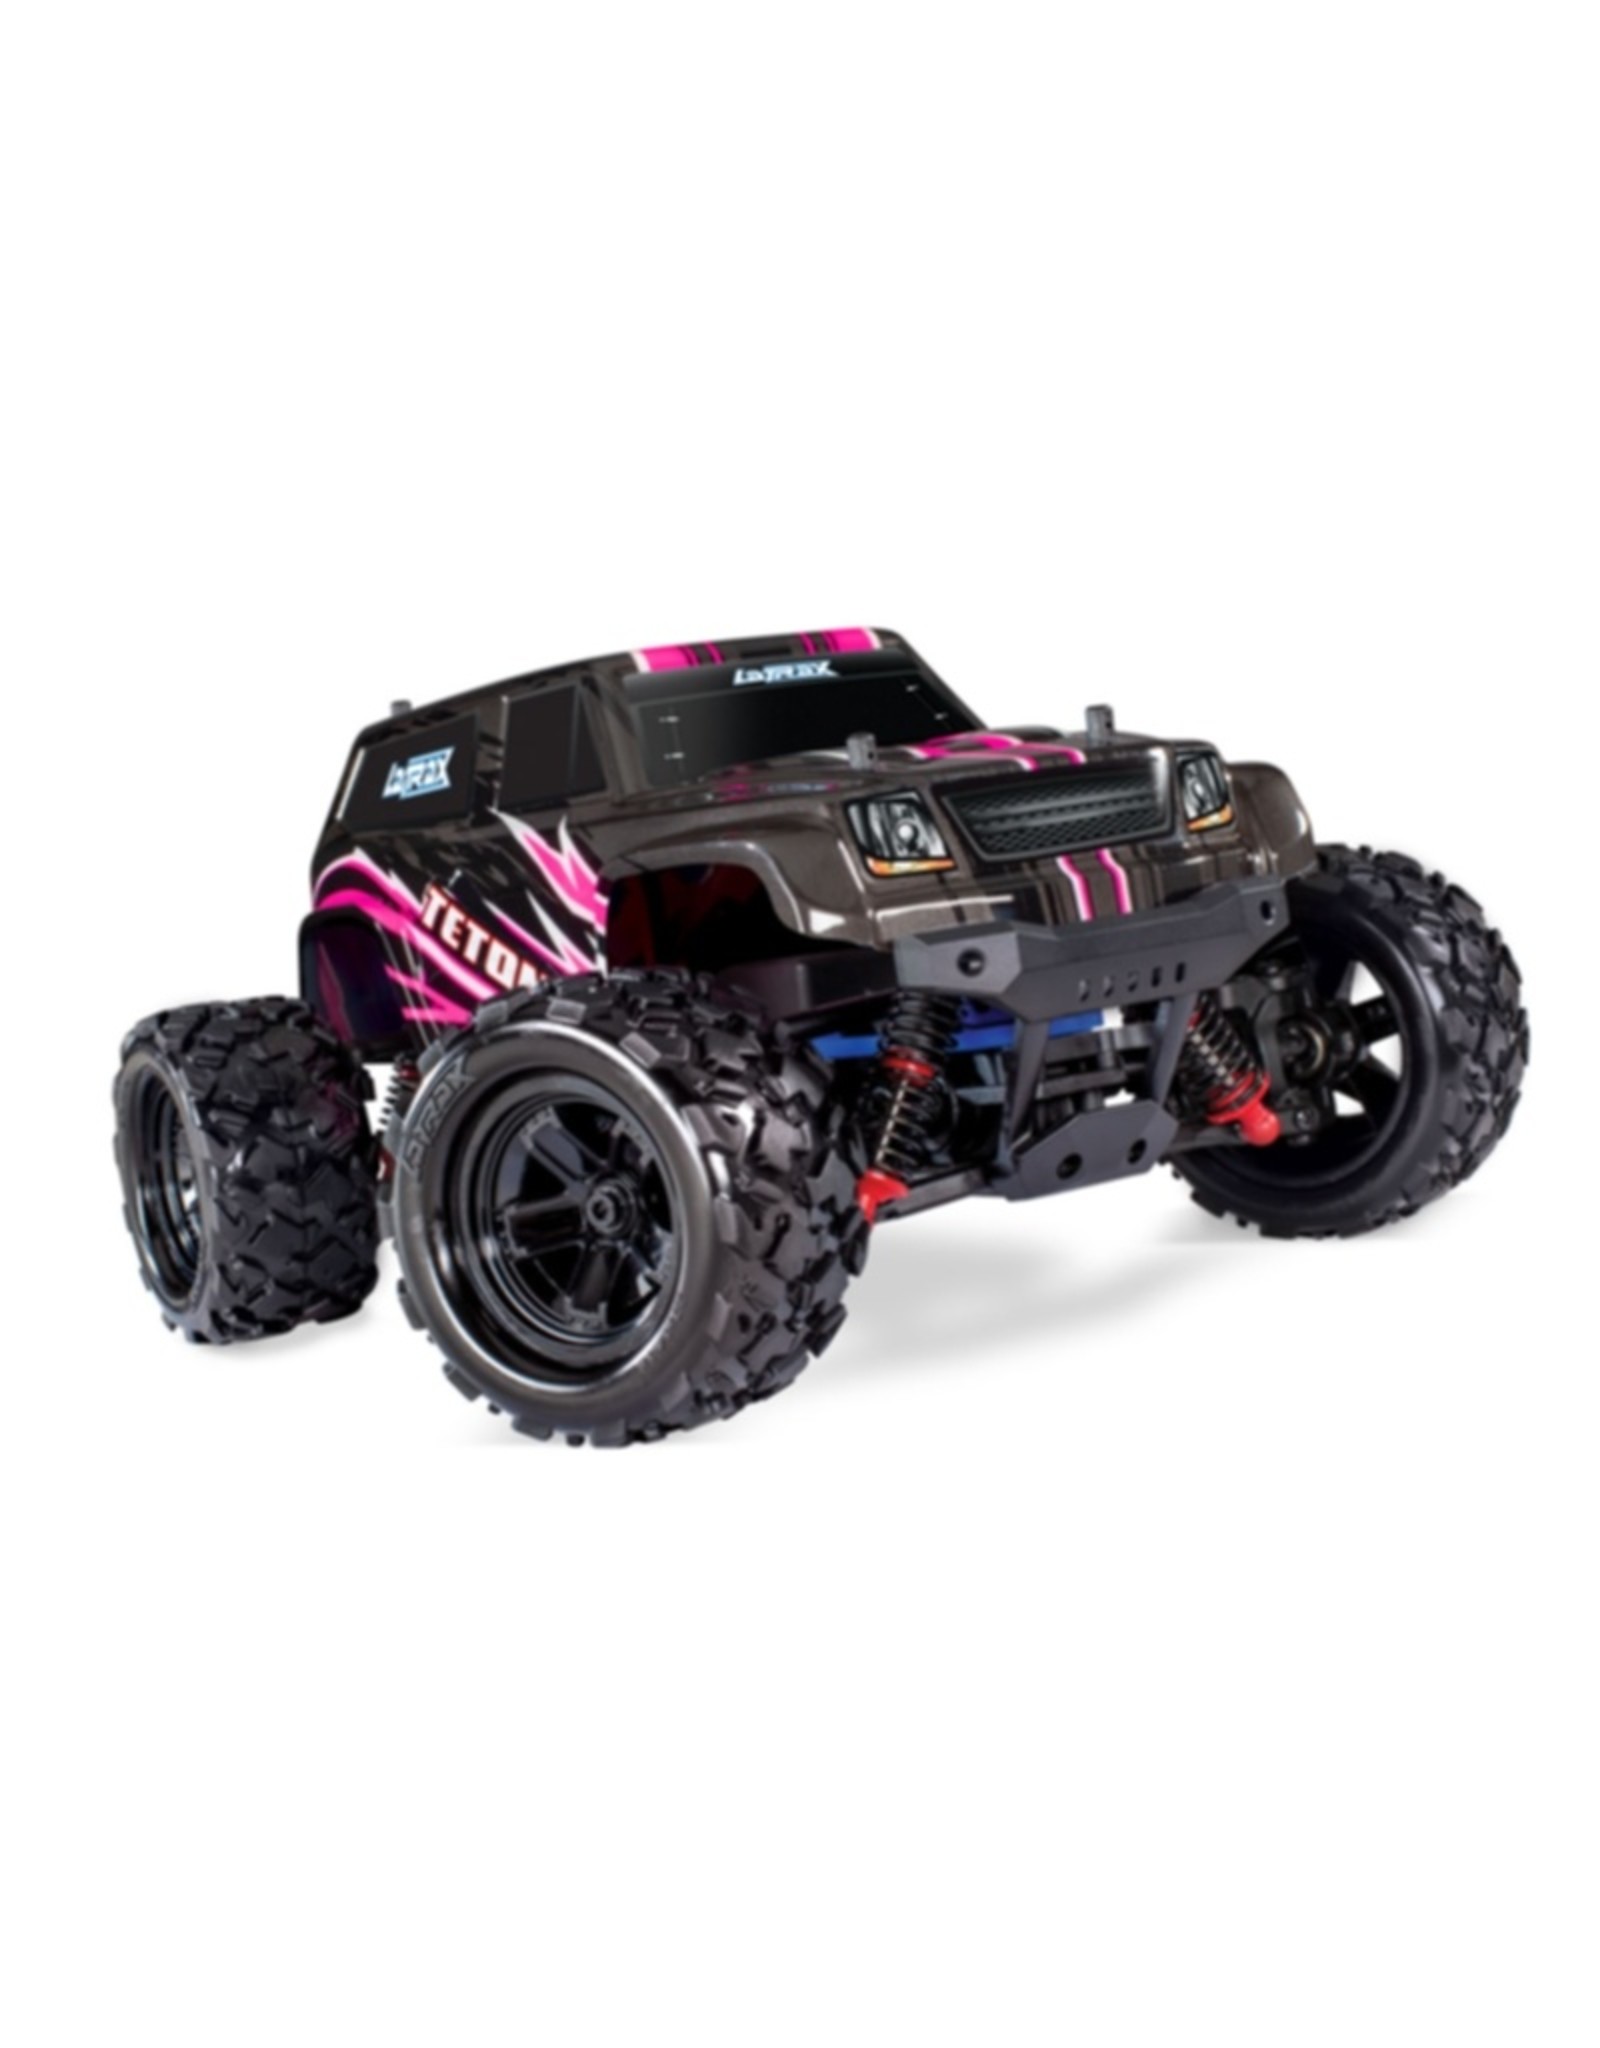 Traxxas TRA76054-5 PINK 1/18 LATRAX TETON WITH AC CHARGER